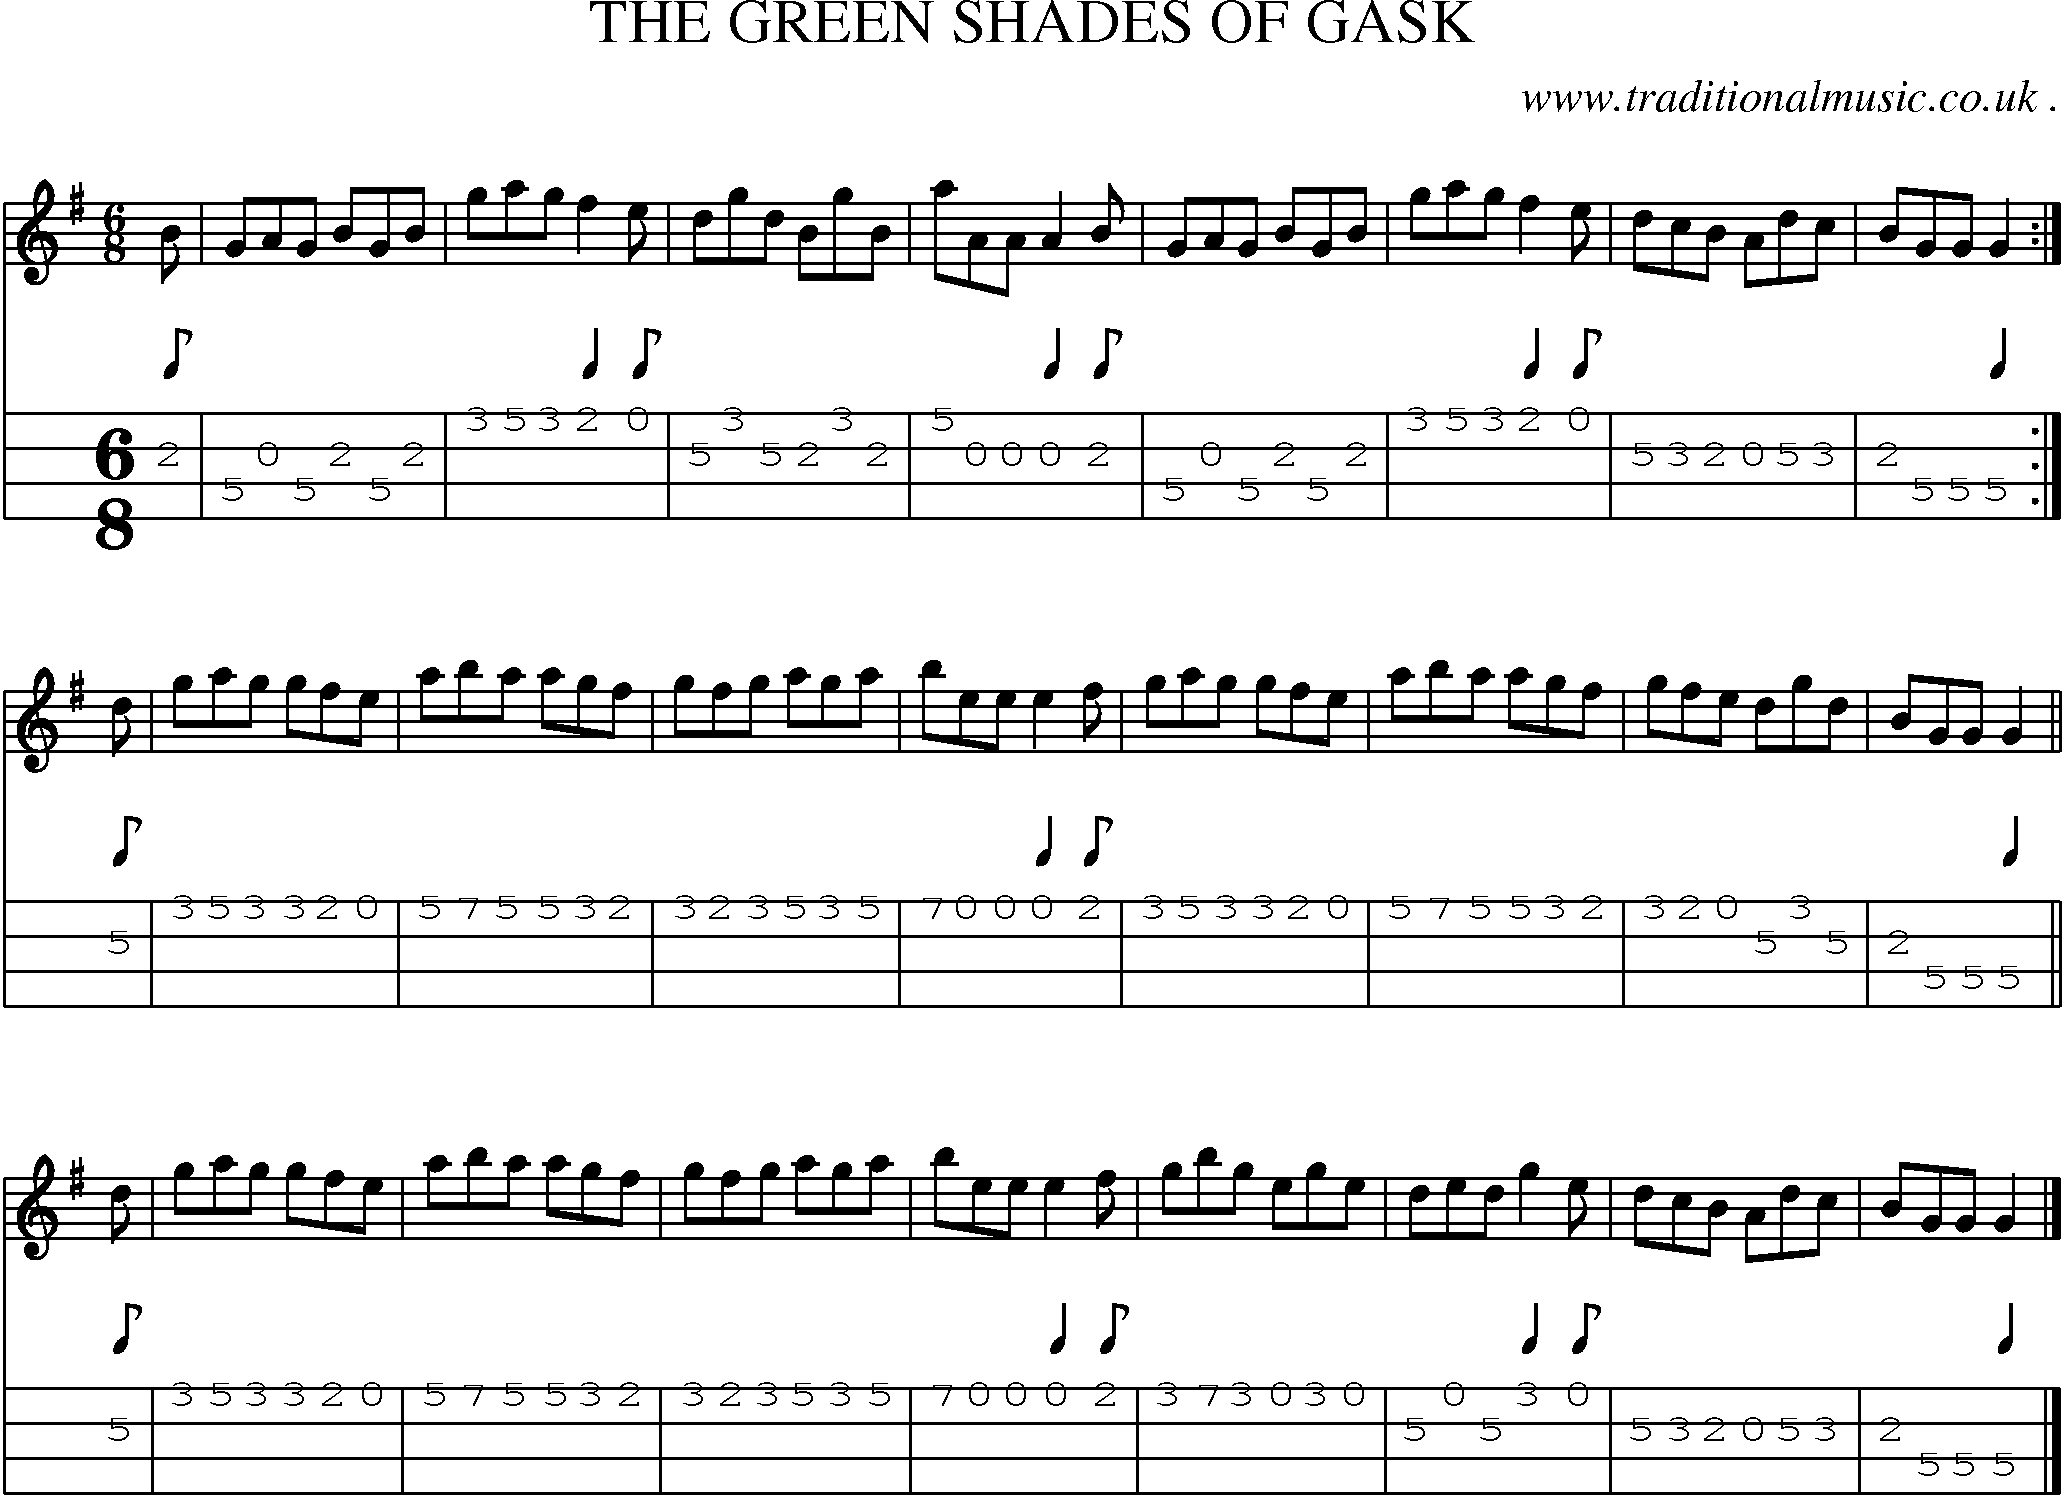 Sheet-music  score, Chords and Mandolin Tabs for The Green Shades Of Gask